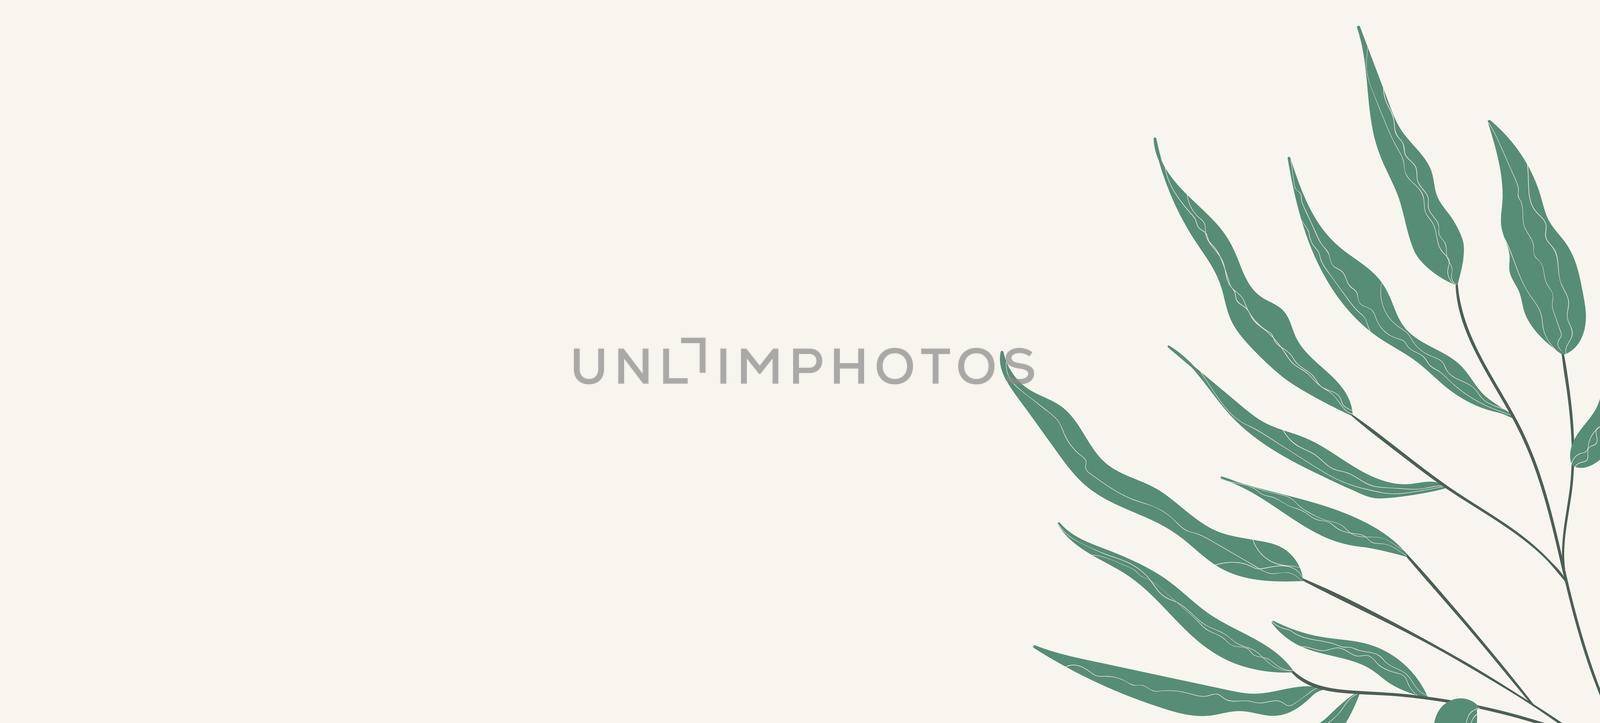 Floral web banner with drawn color exotic monstera leaves. Nature concept design. Modern floral compositions with summer branches. Vector illustration on the theme of ecology, natura, environment by allaku